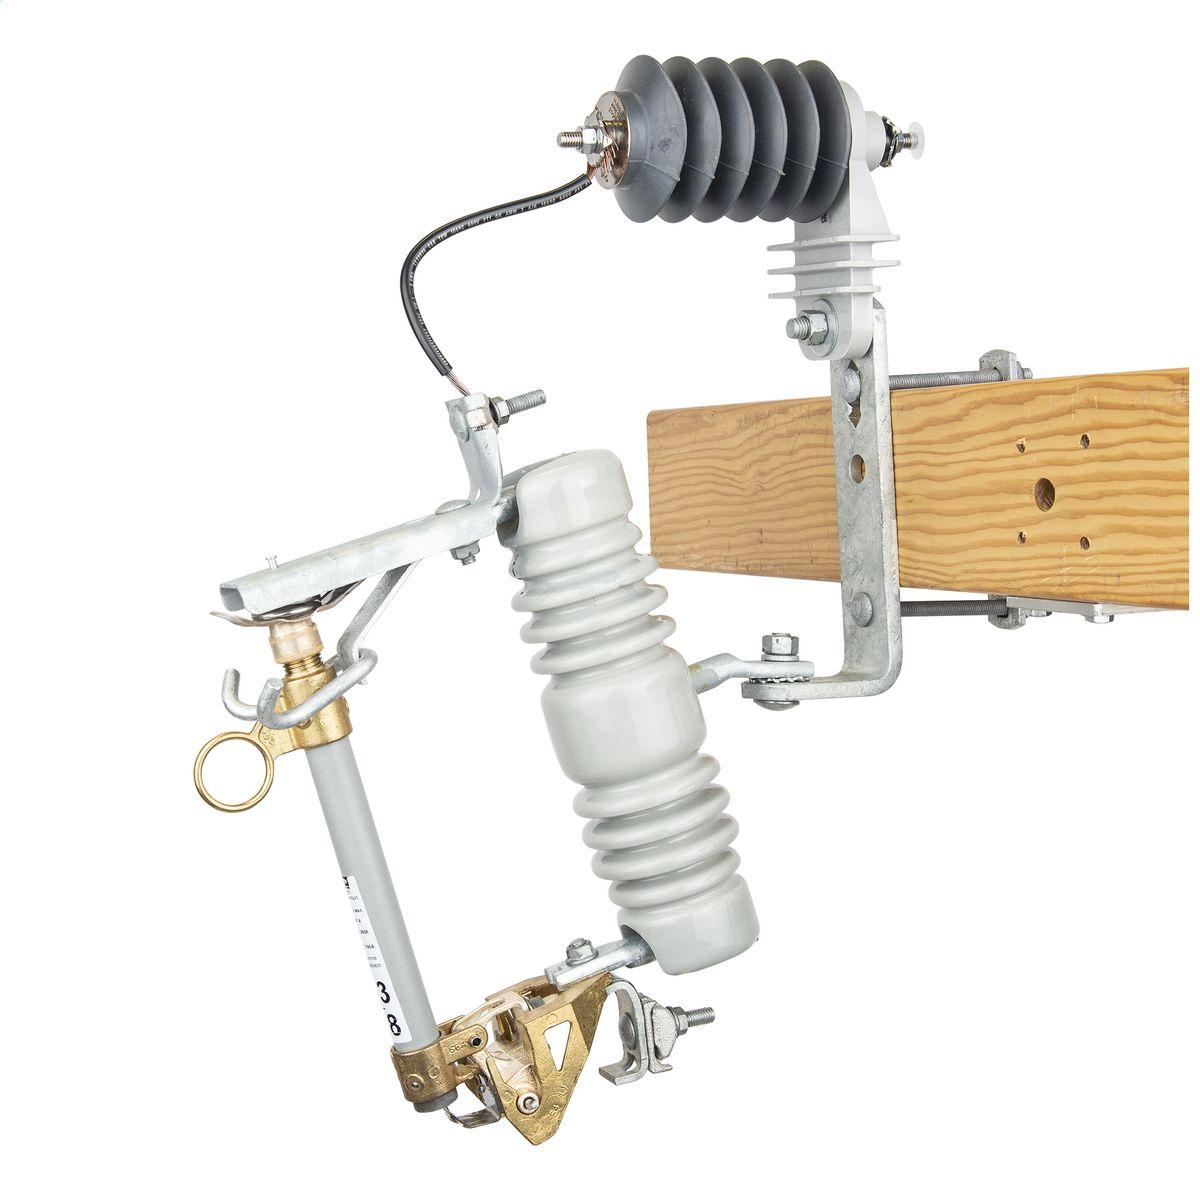 Hubbell C71DL133EDM 15 kV, 110 kV BIL, Standard Type C Porcelain Cutout / Arrester Combination with a 300A solid blade, small eyebolt connector and a D-shape pole mounting bracket. 